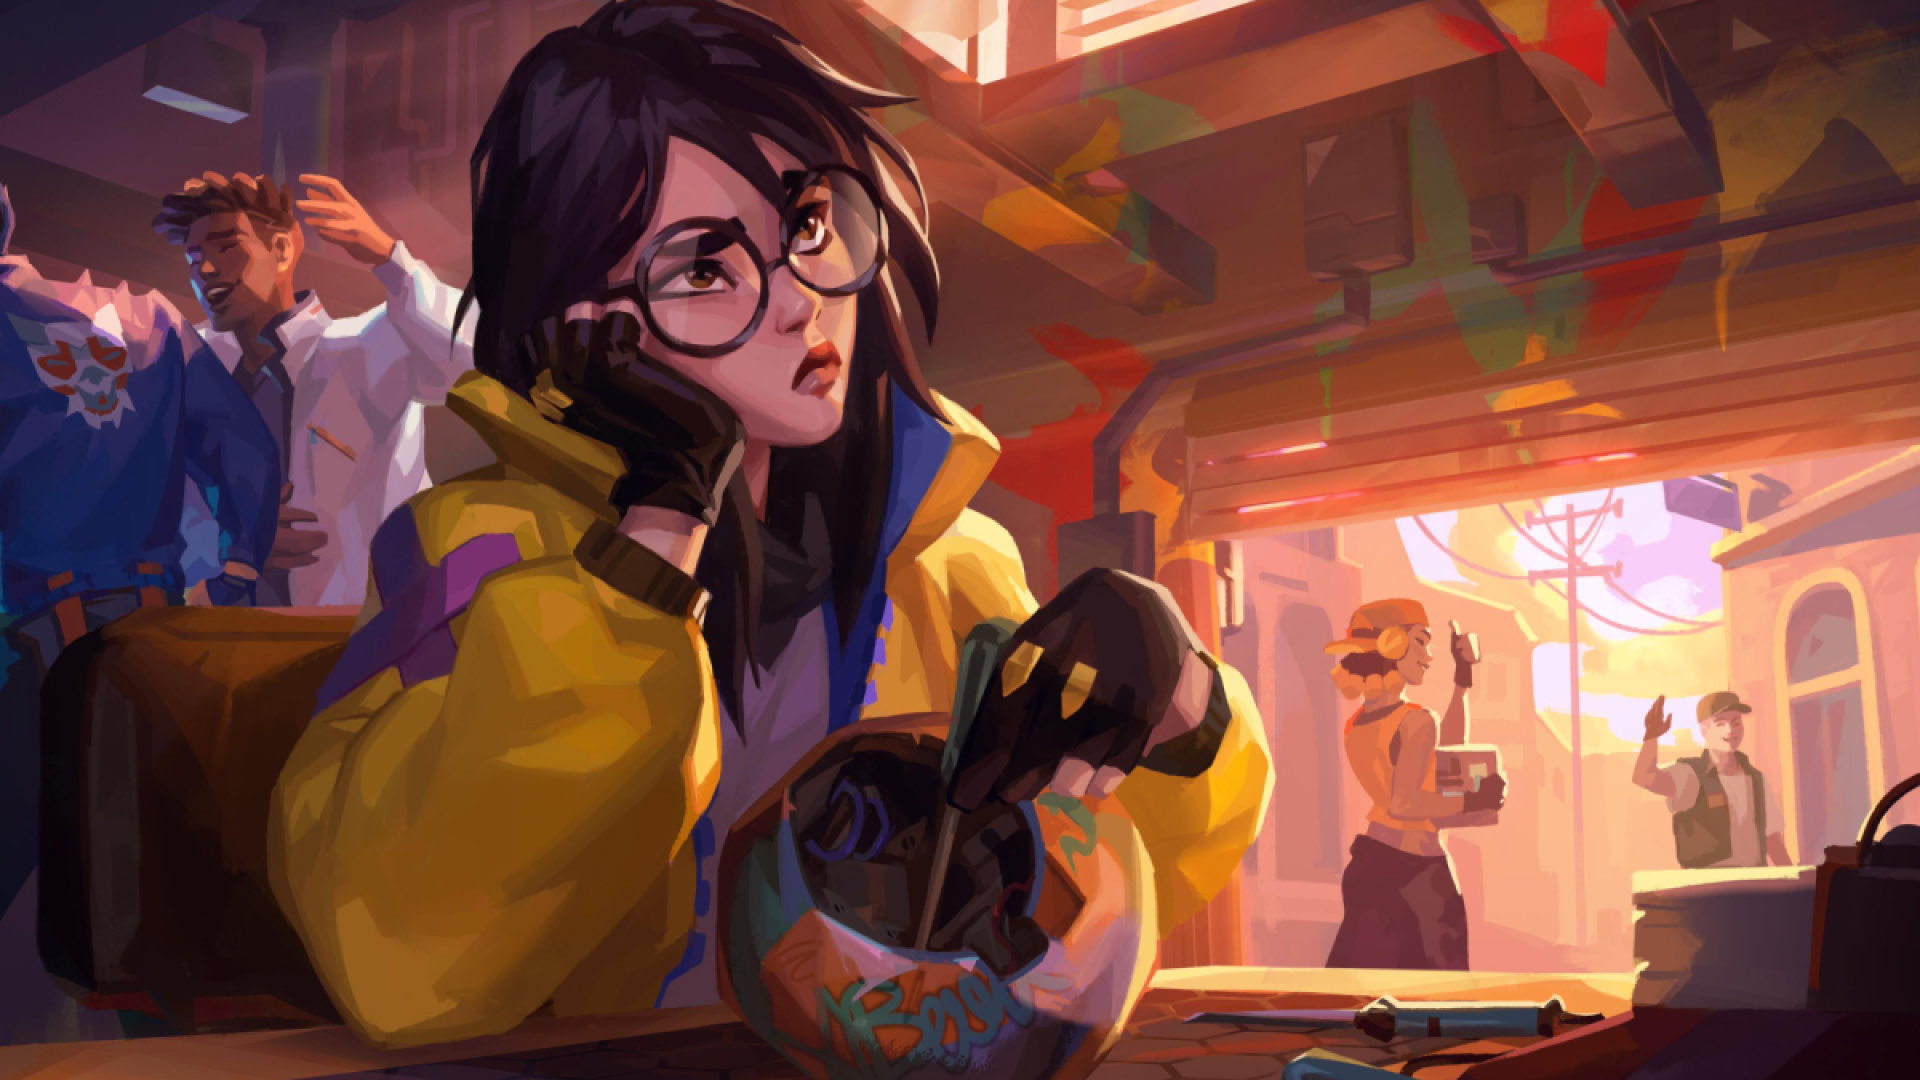 Killjoy in Raze's workshop, shortly before the two kiss. Artwork for Riot Games' Valorant.